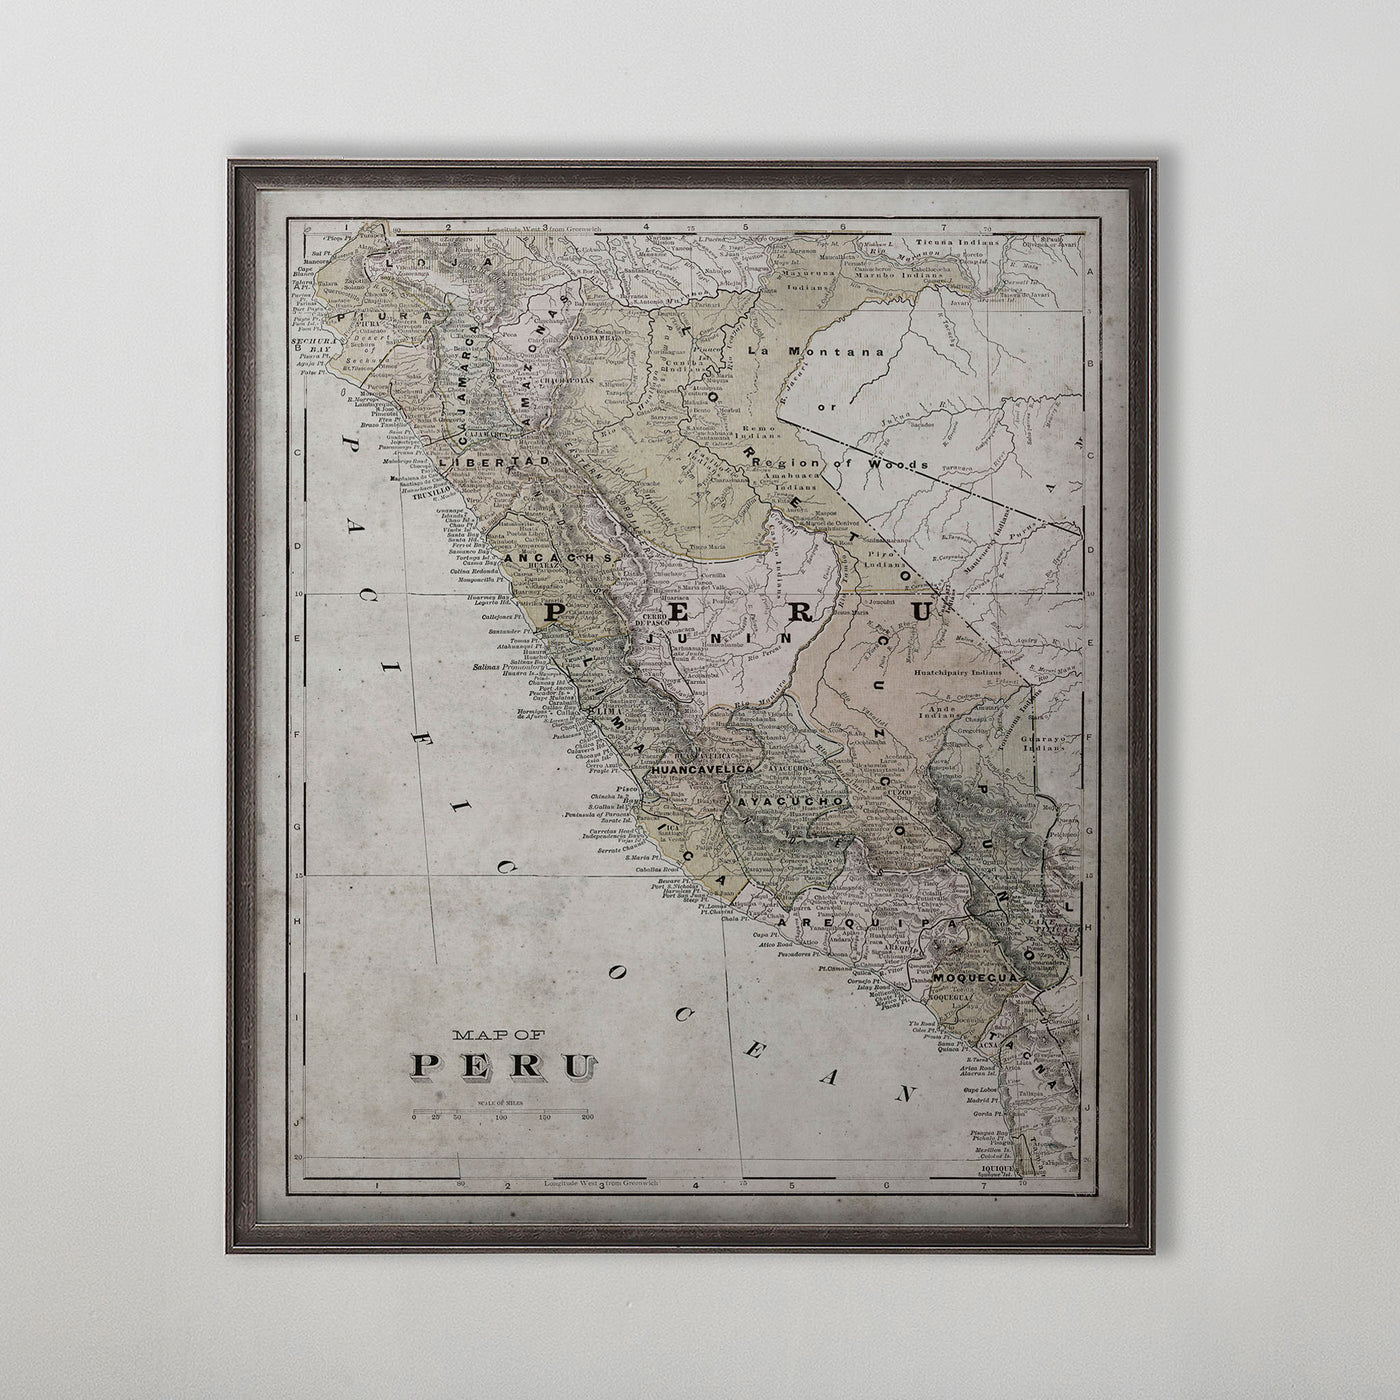 Old vintage historic map of Peru for wall art home decor. 